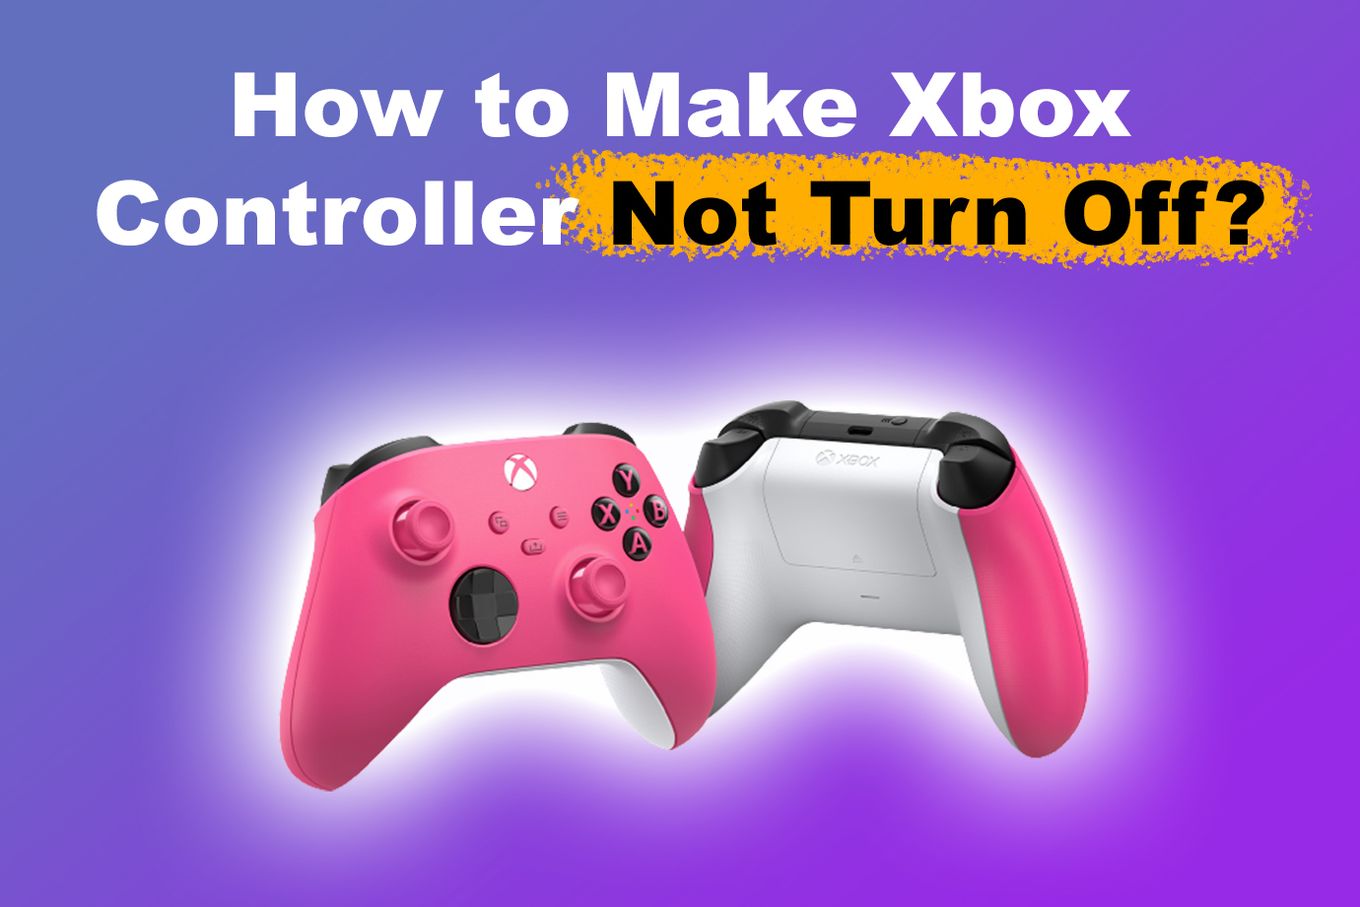 How to download games on Xbox when it is turned off